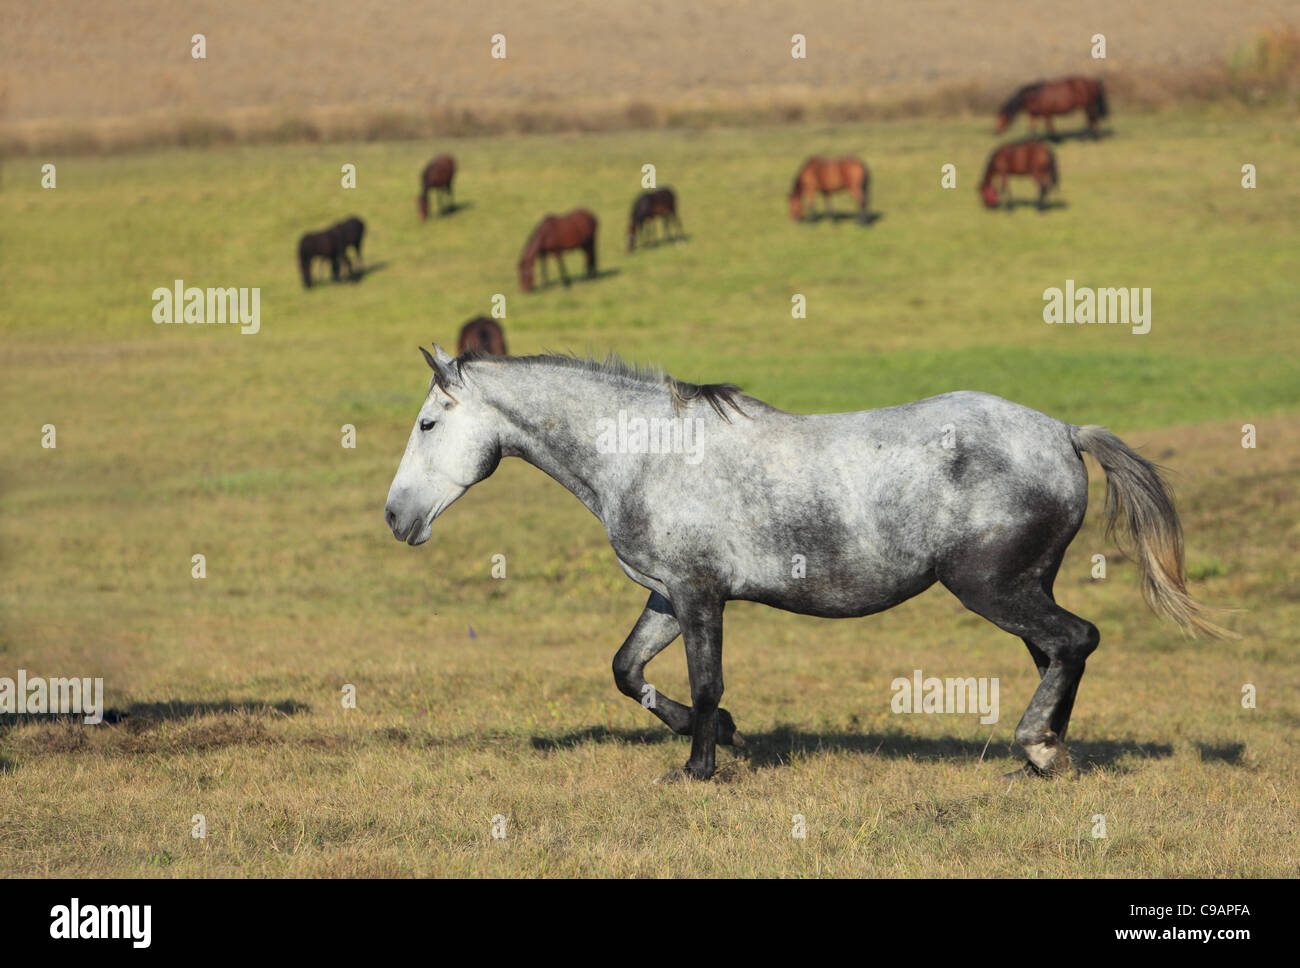 A Lippizan horse in front of a herd of horses in a field. Stock Photo